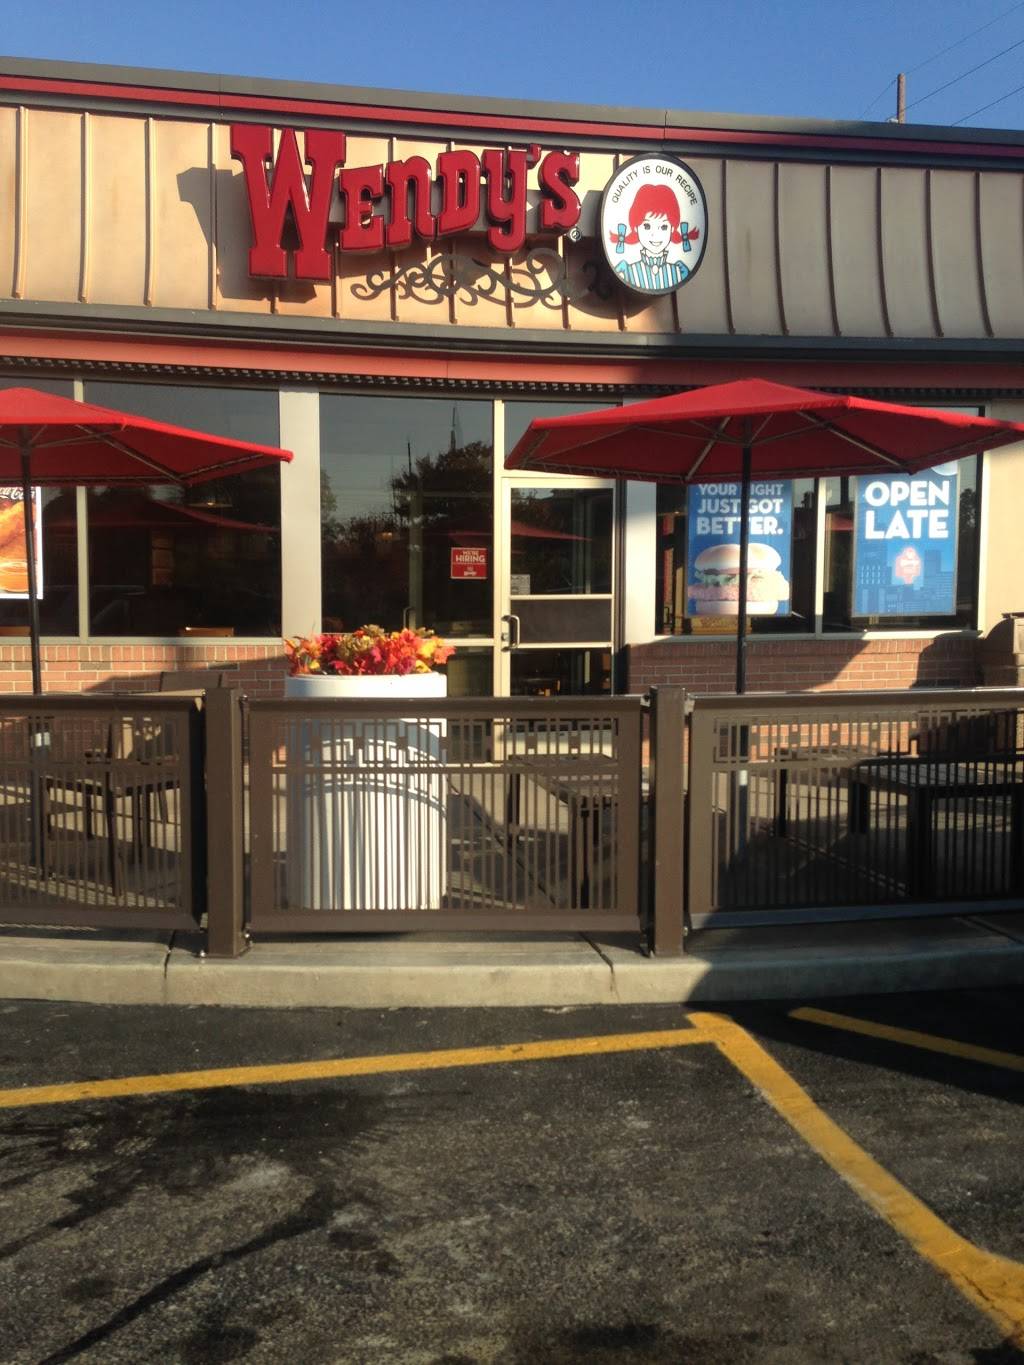 Wendys | restaurant | 1450 W Morris St, Indianapolis, IN 46221, USA | 3176360009 OR +1 317-636-0009